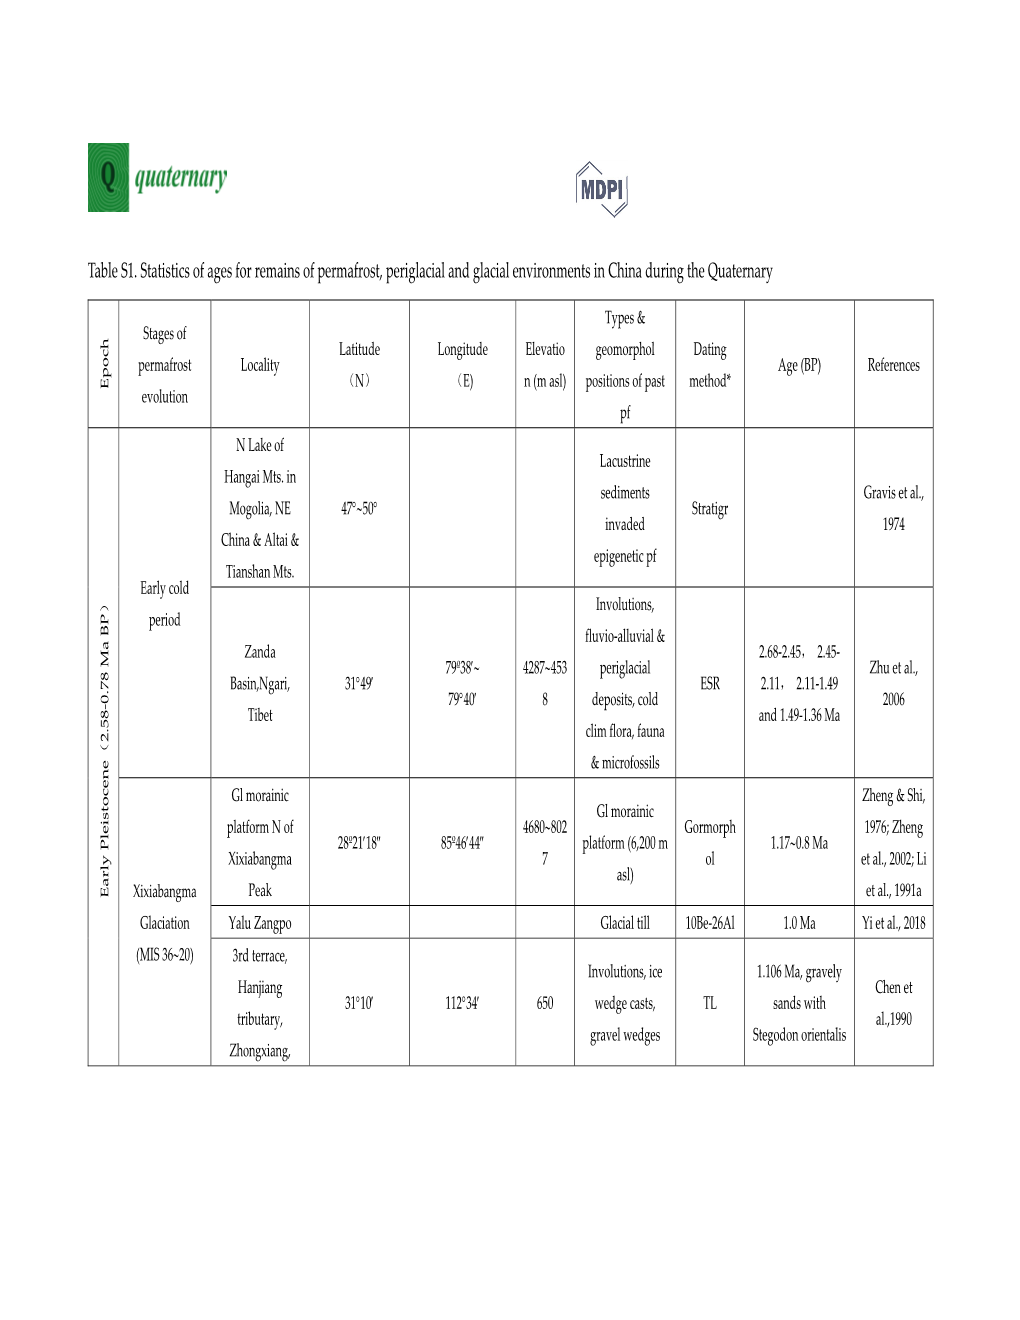 Table S1. Statistics of Ages for Remains of Permafrost, Periglacial and Glacial Environments in China During the Quaternary